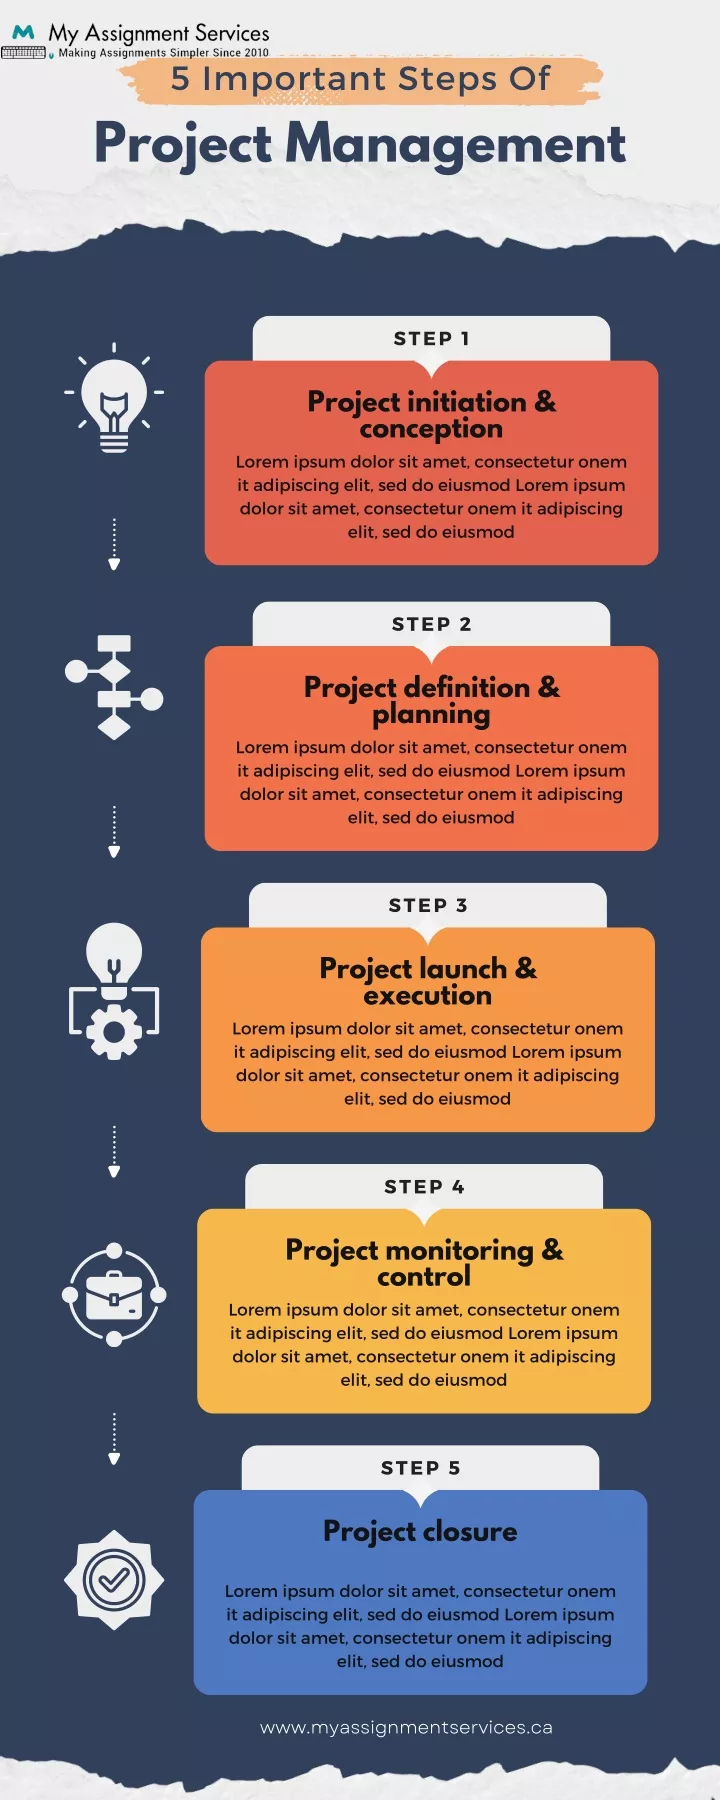 PPT - 5 Important Steps of Project Management PowerPoint Presentation ...